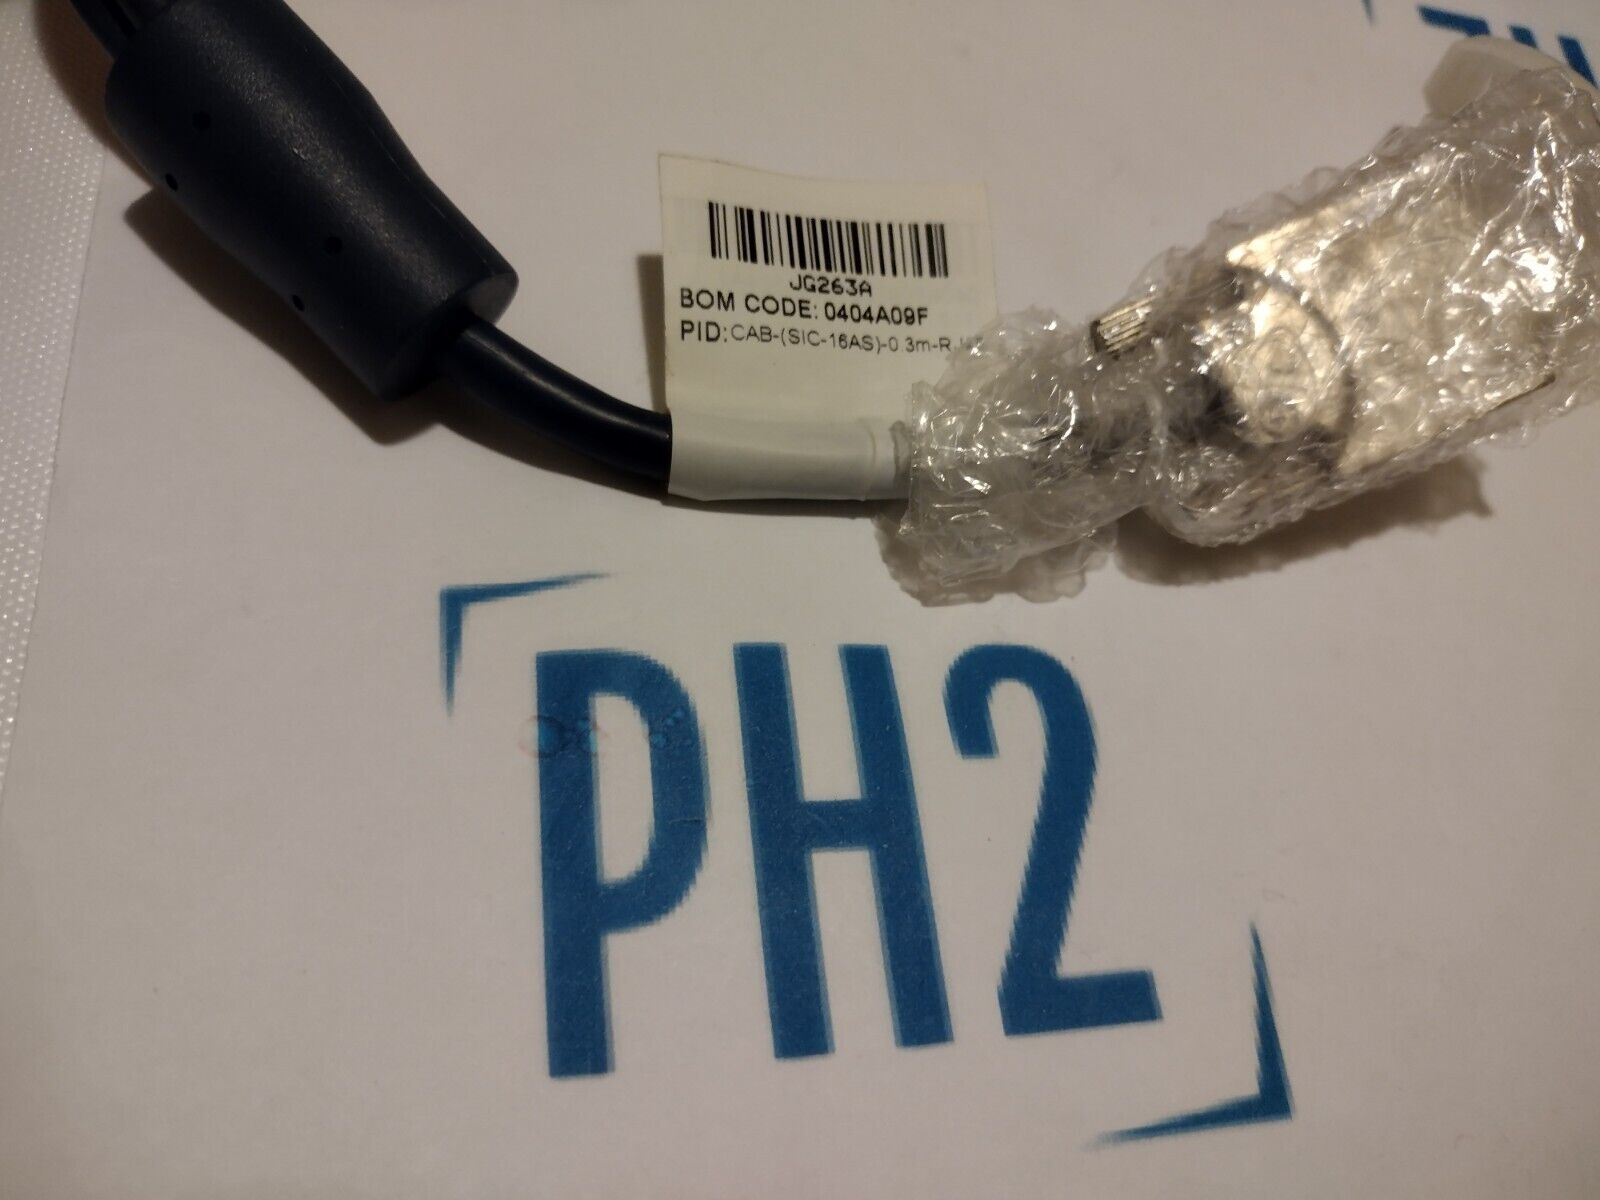 HPE JG263A NEW Genuine Network Cable SIC-16AS- 1.81"(0.3M) - 4 x RJ-45 Male